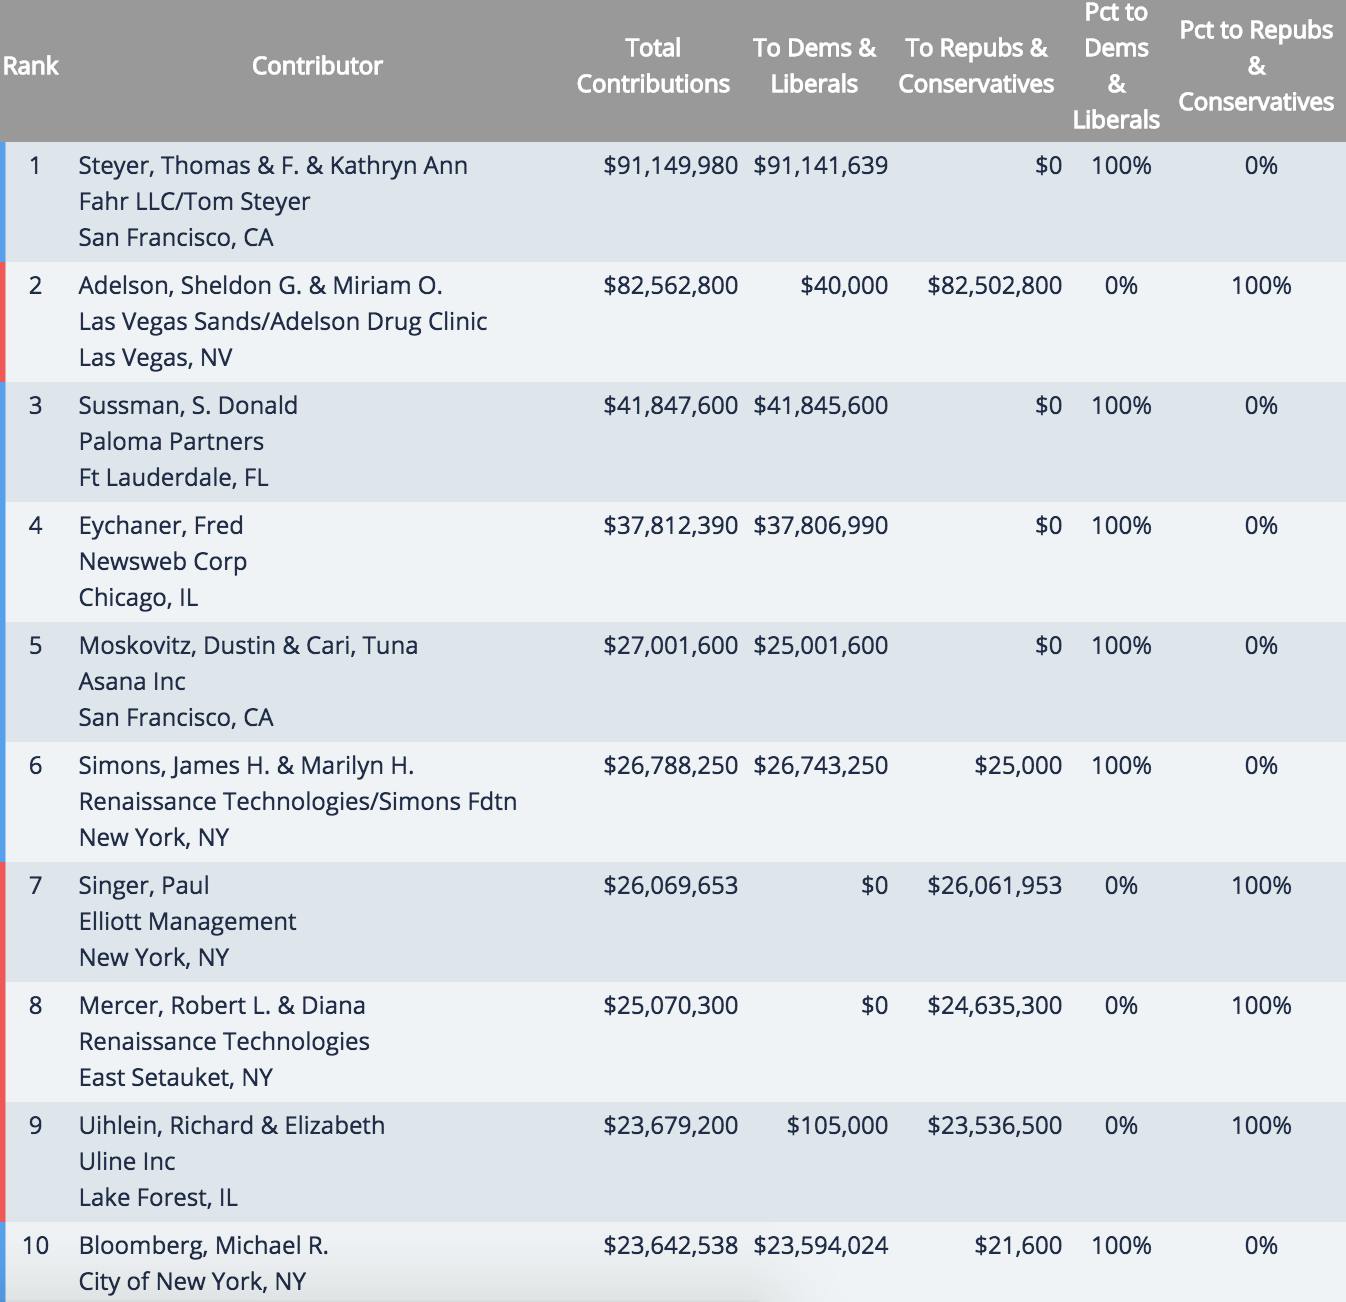 Top 10 political donors during the 2016 election cycle, via OpenSecrets